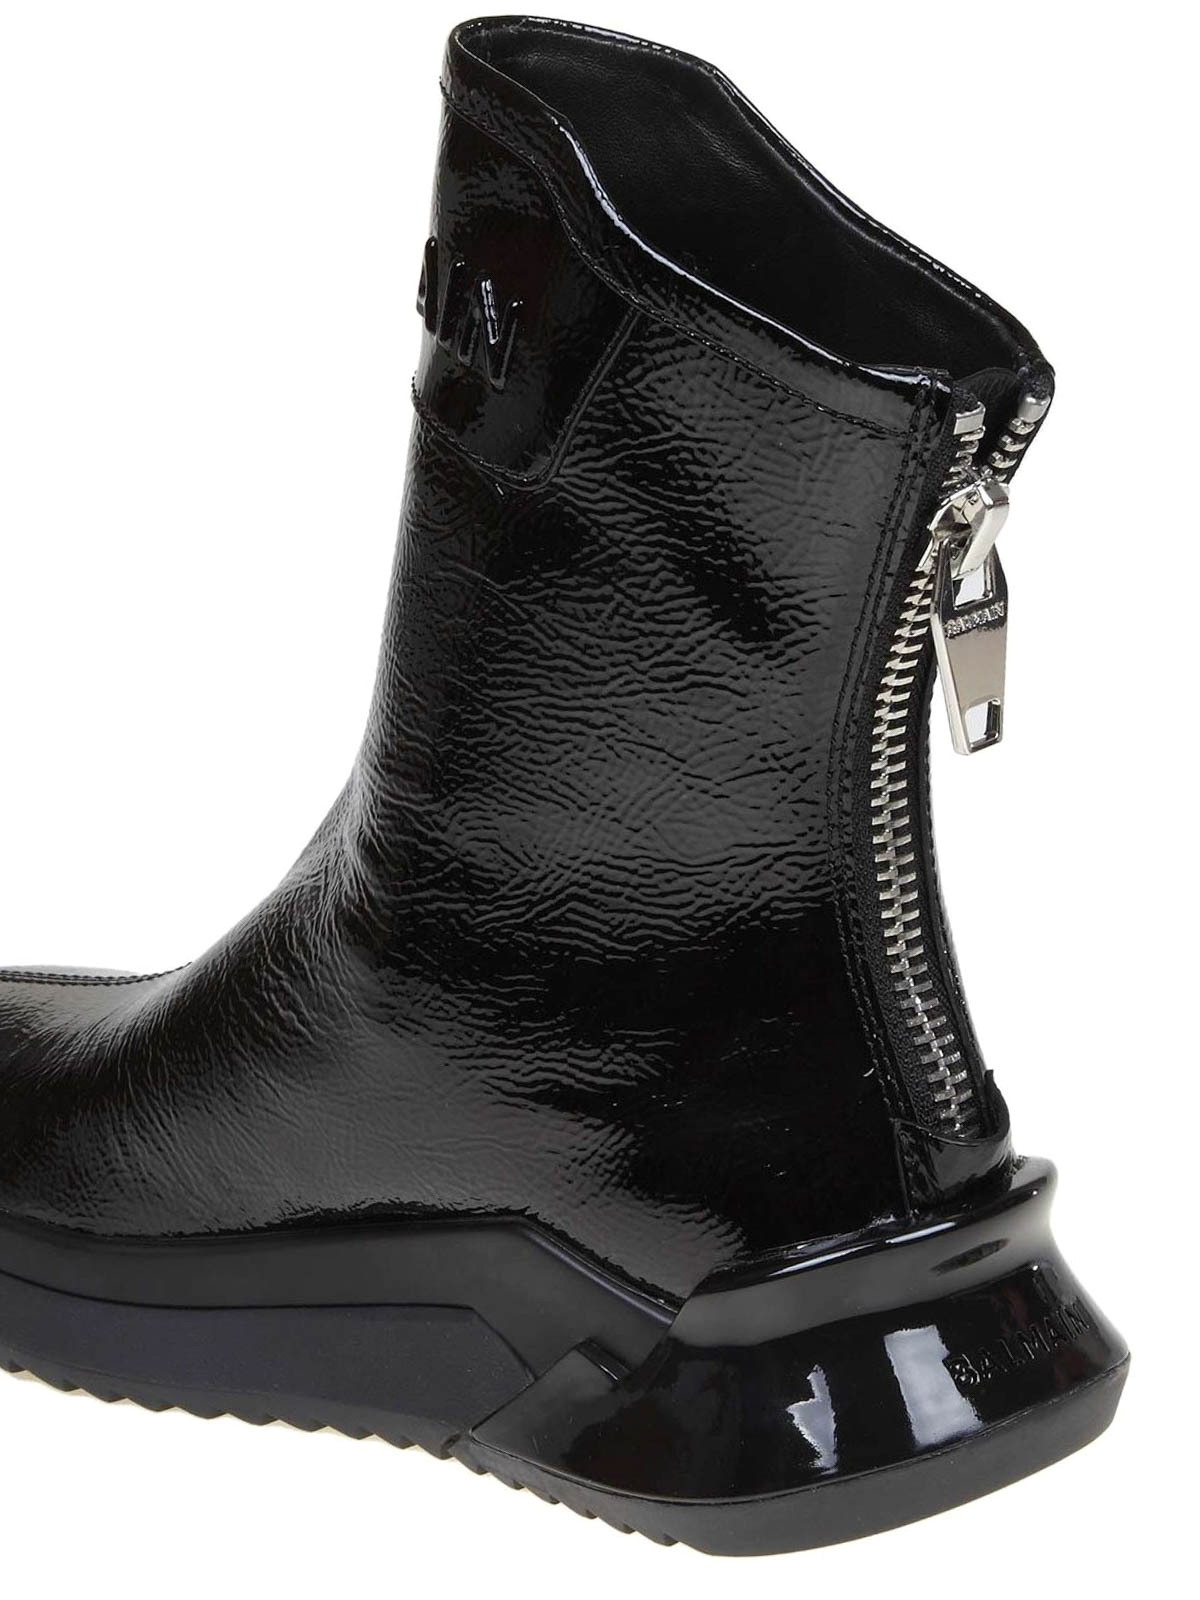 Ankle boots - B-Glove leather ankle boots - SN0C254LVEREAP